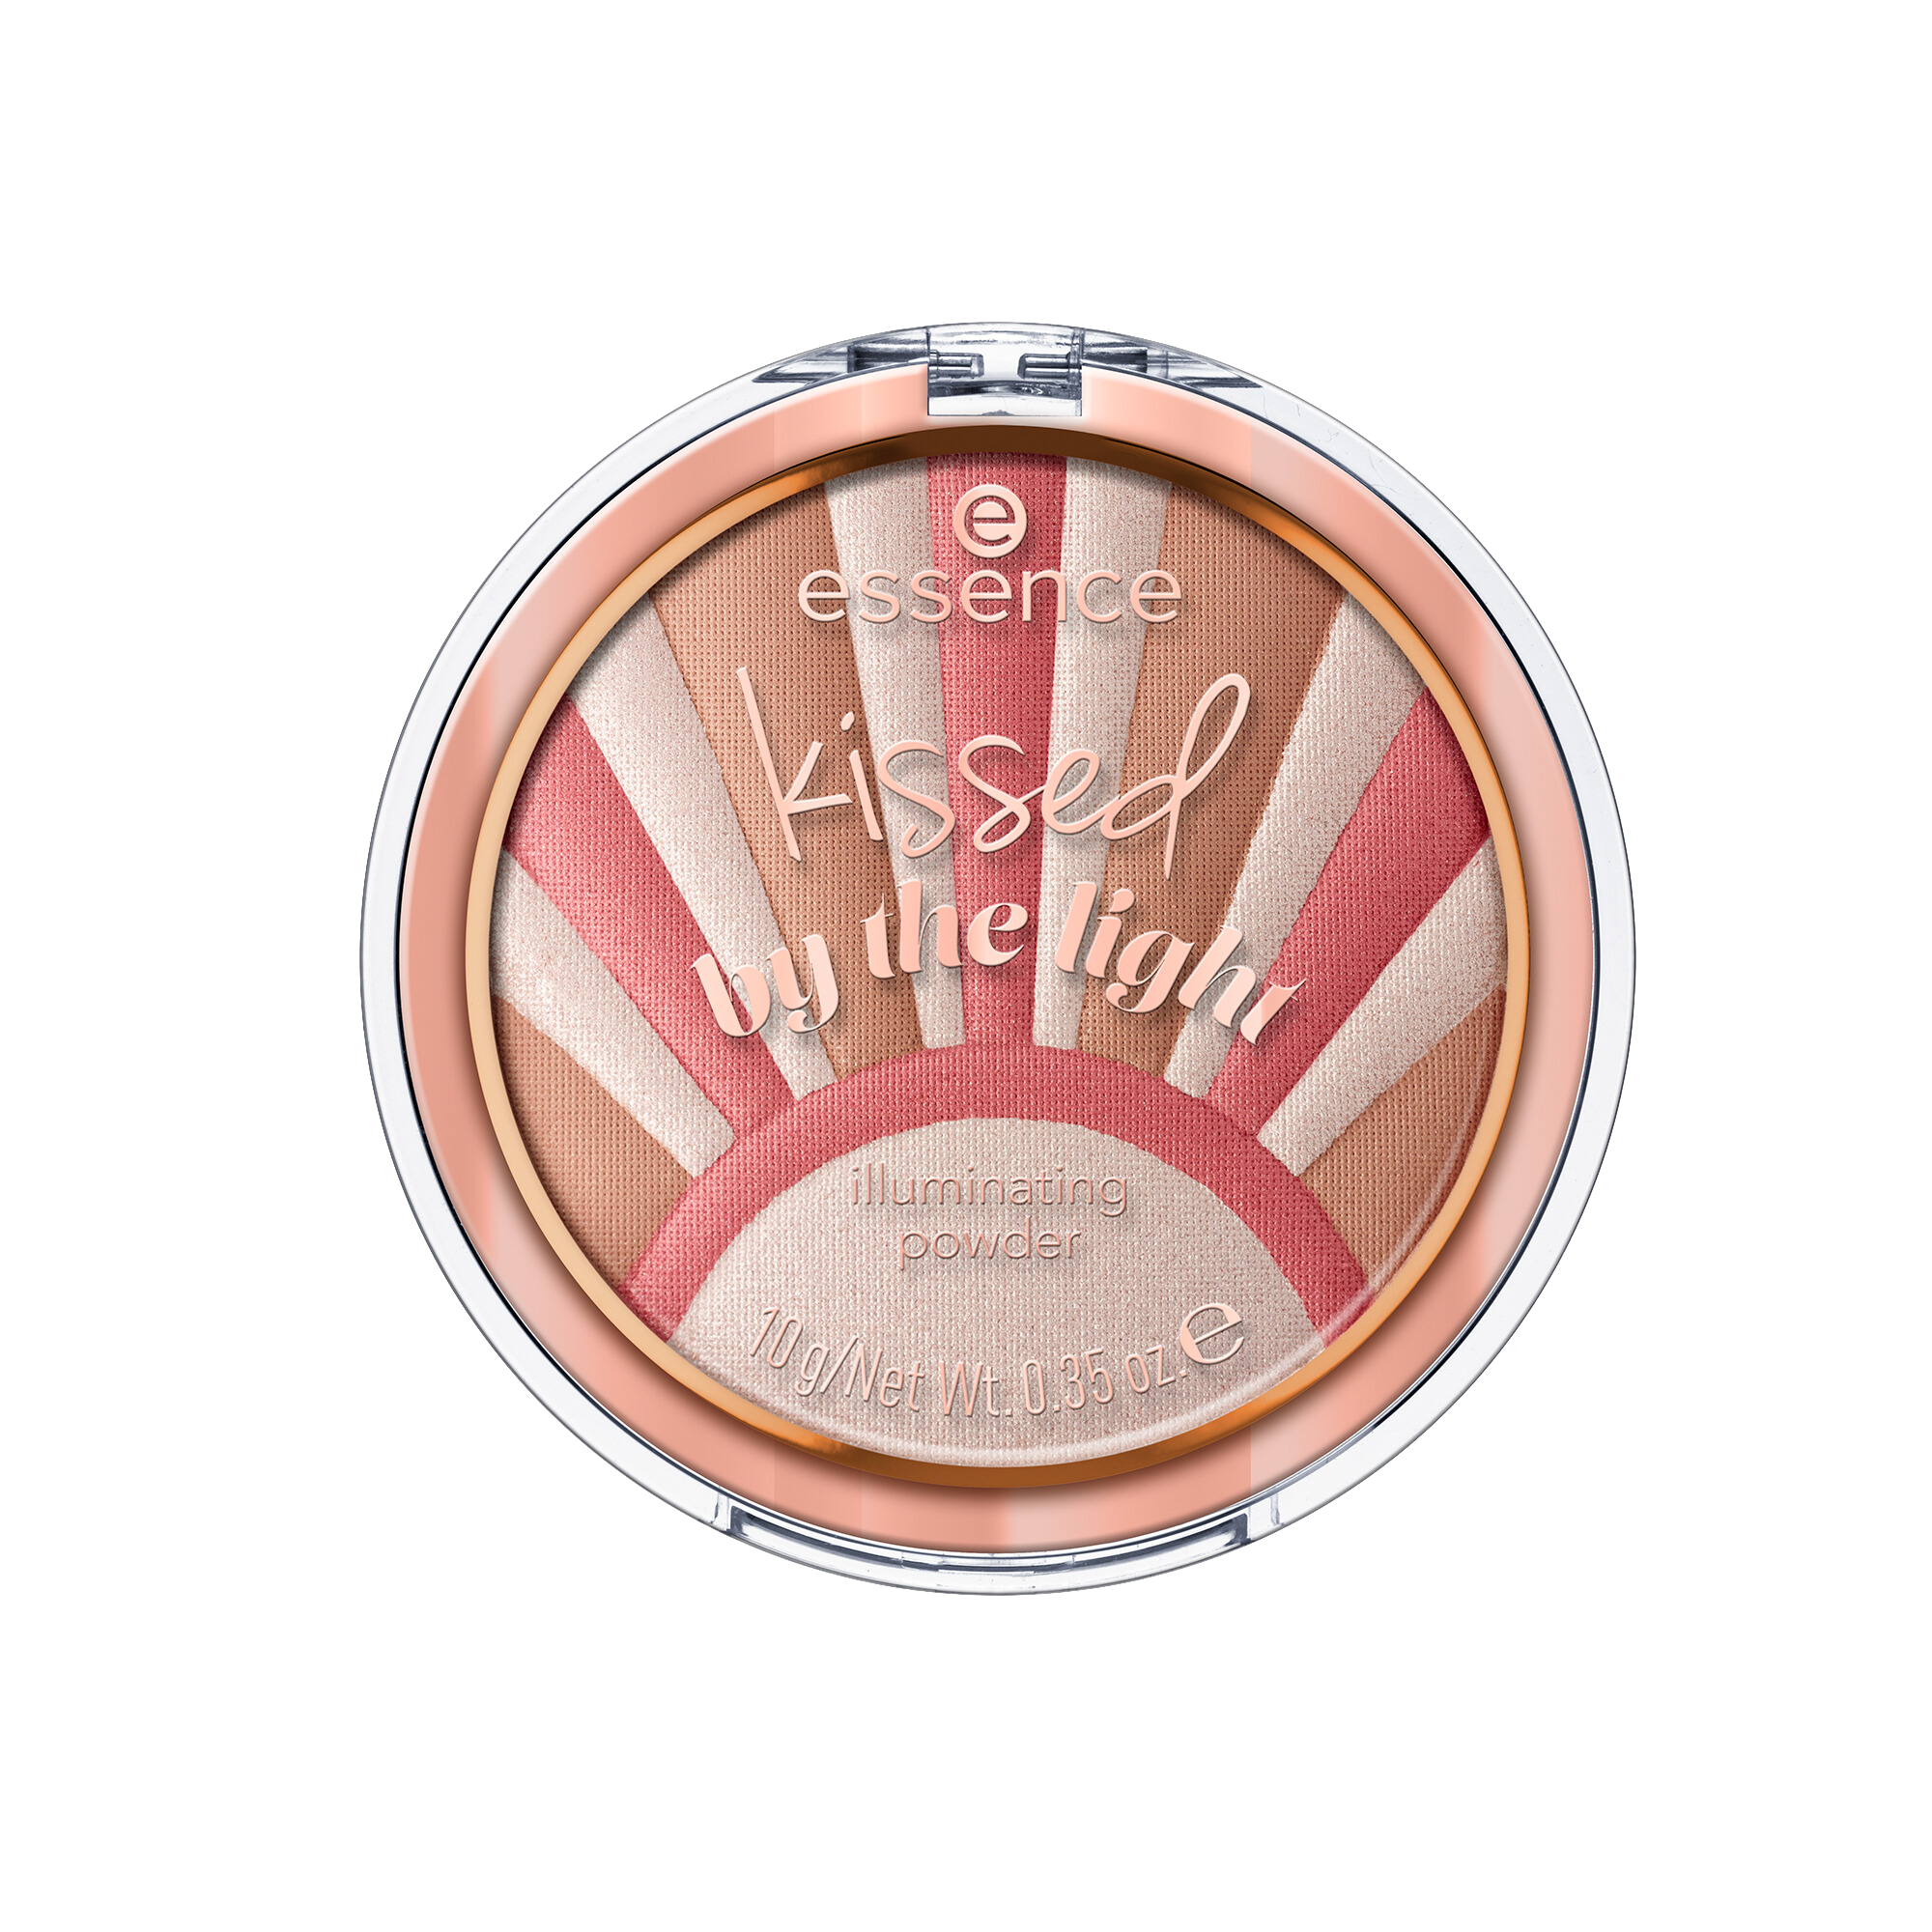 Kissed By The Light Face Illuminator – essence makeup